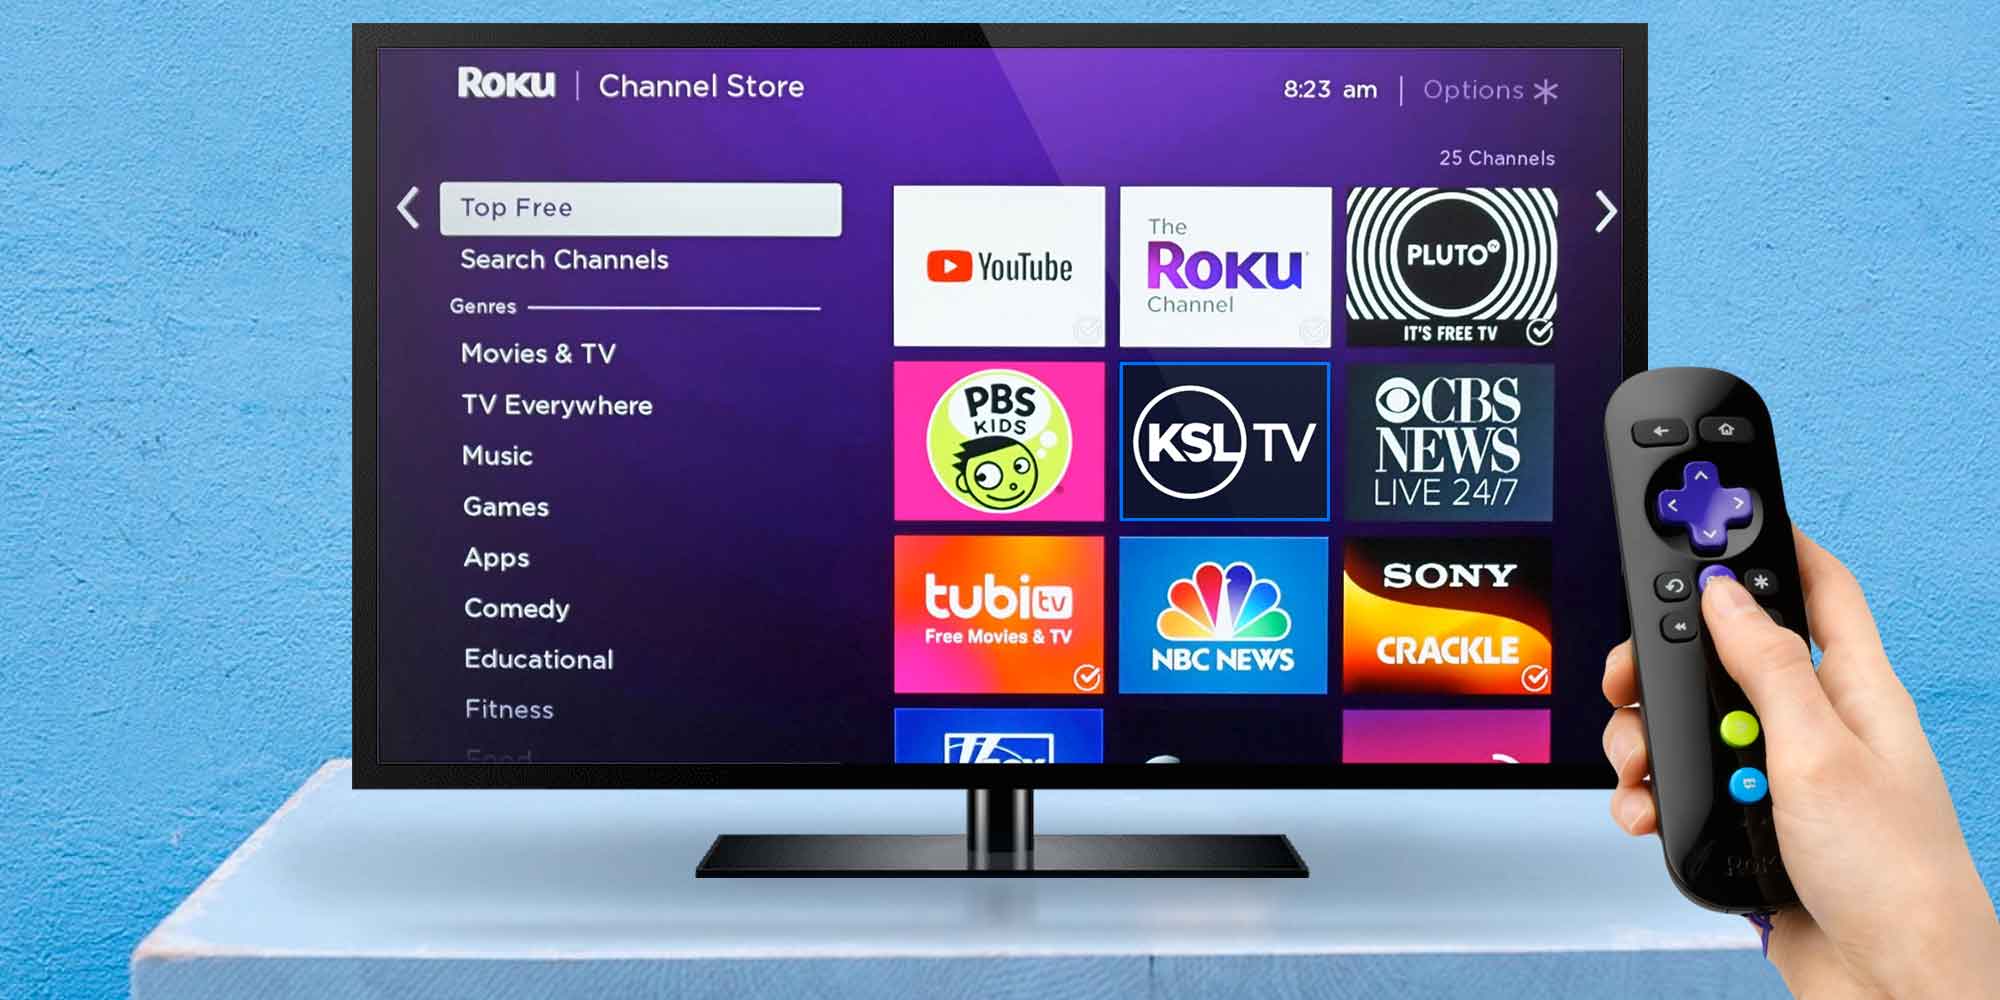 While Apple and Amazon battle for market share in the Connected TV space, R...